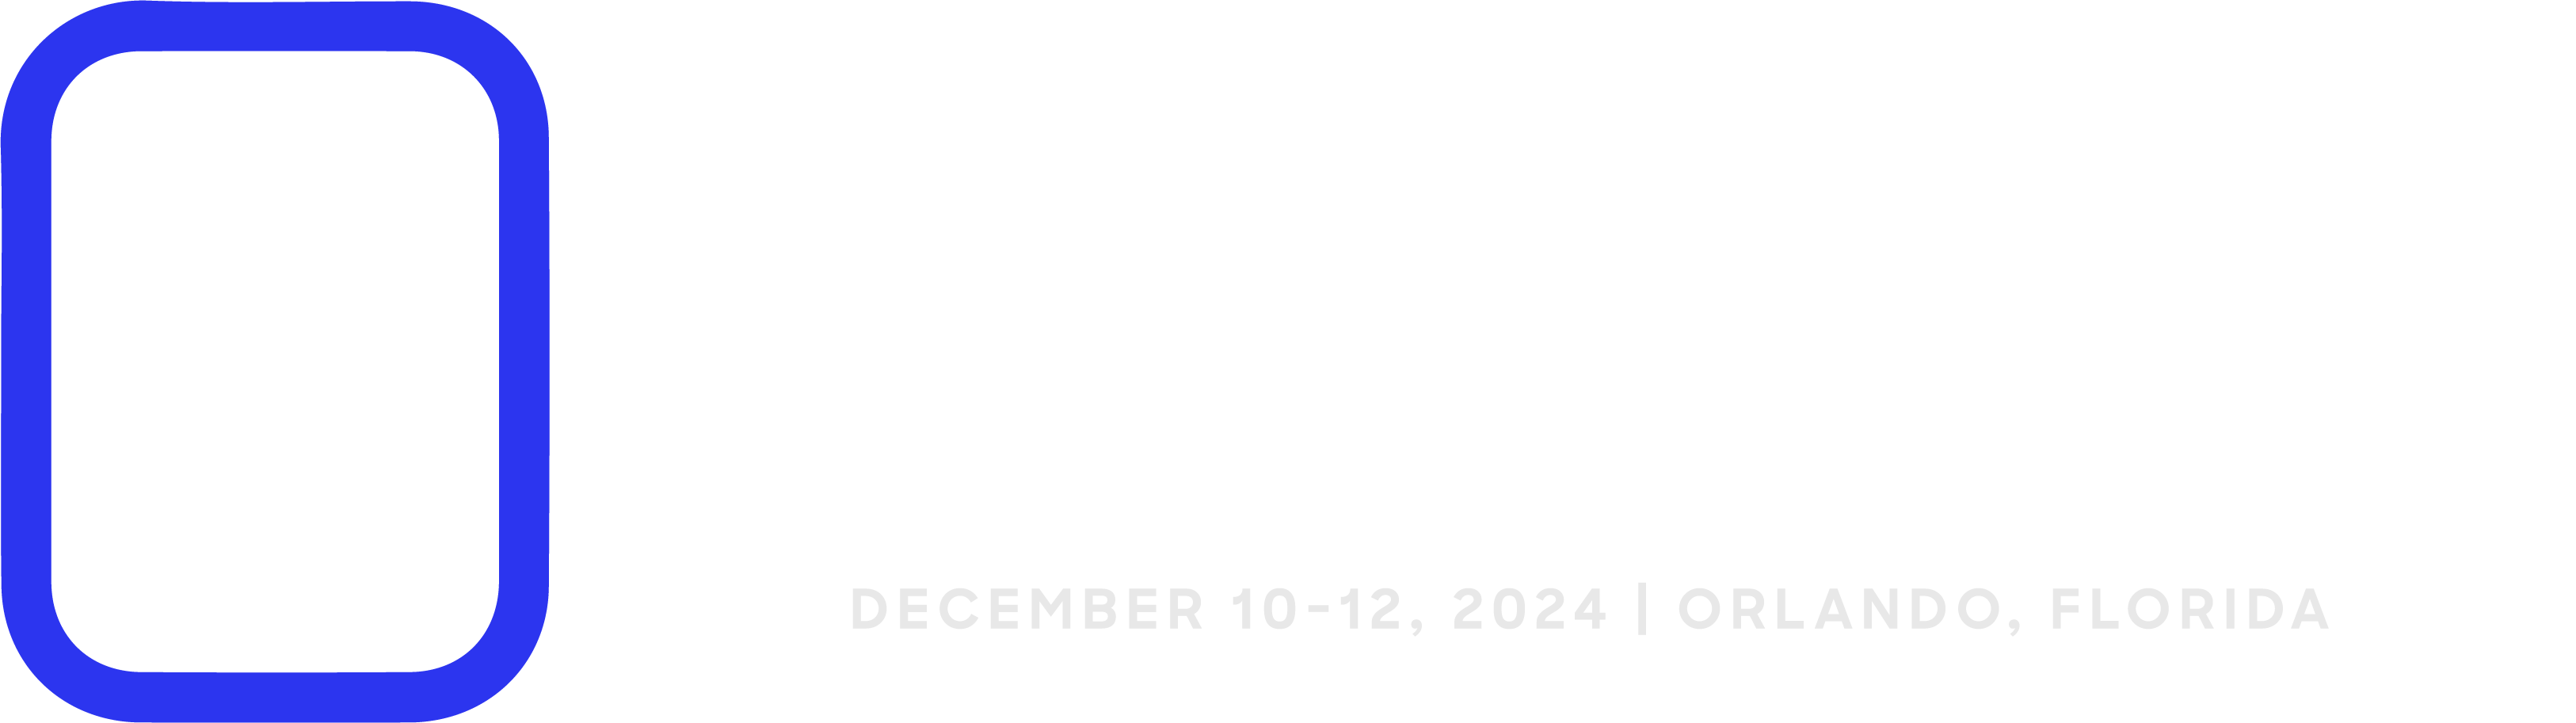 Spacepower Conference